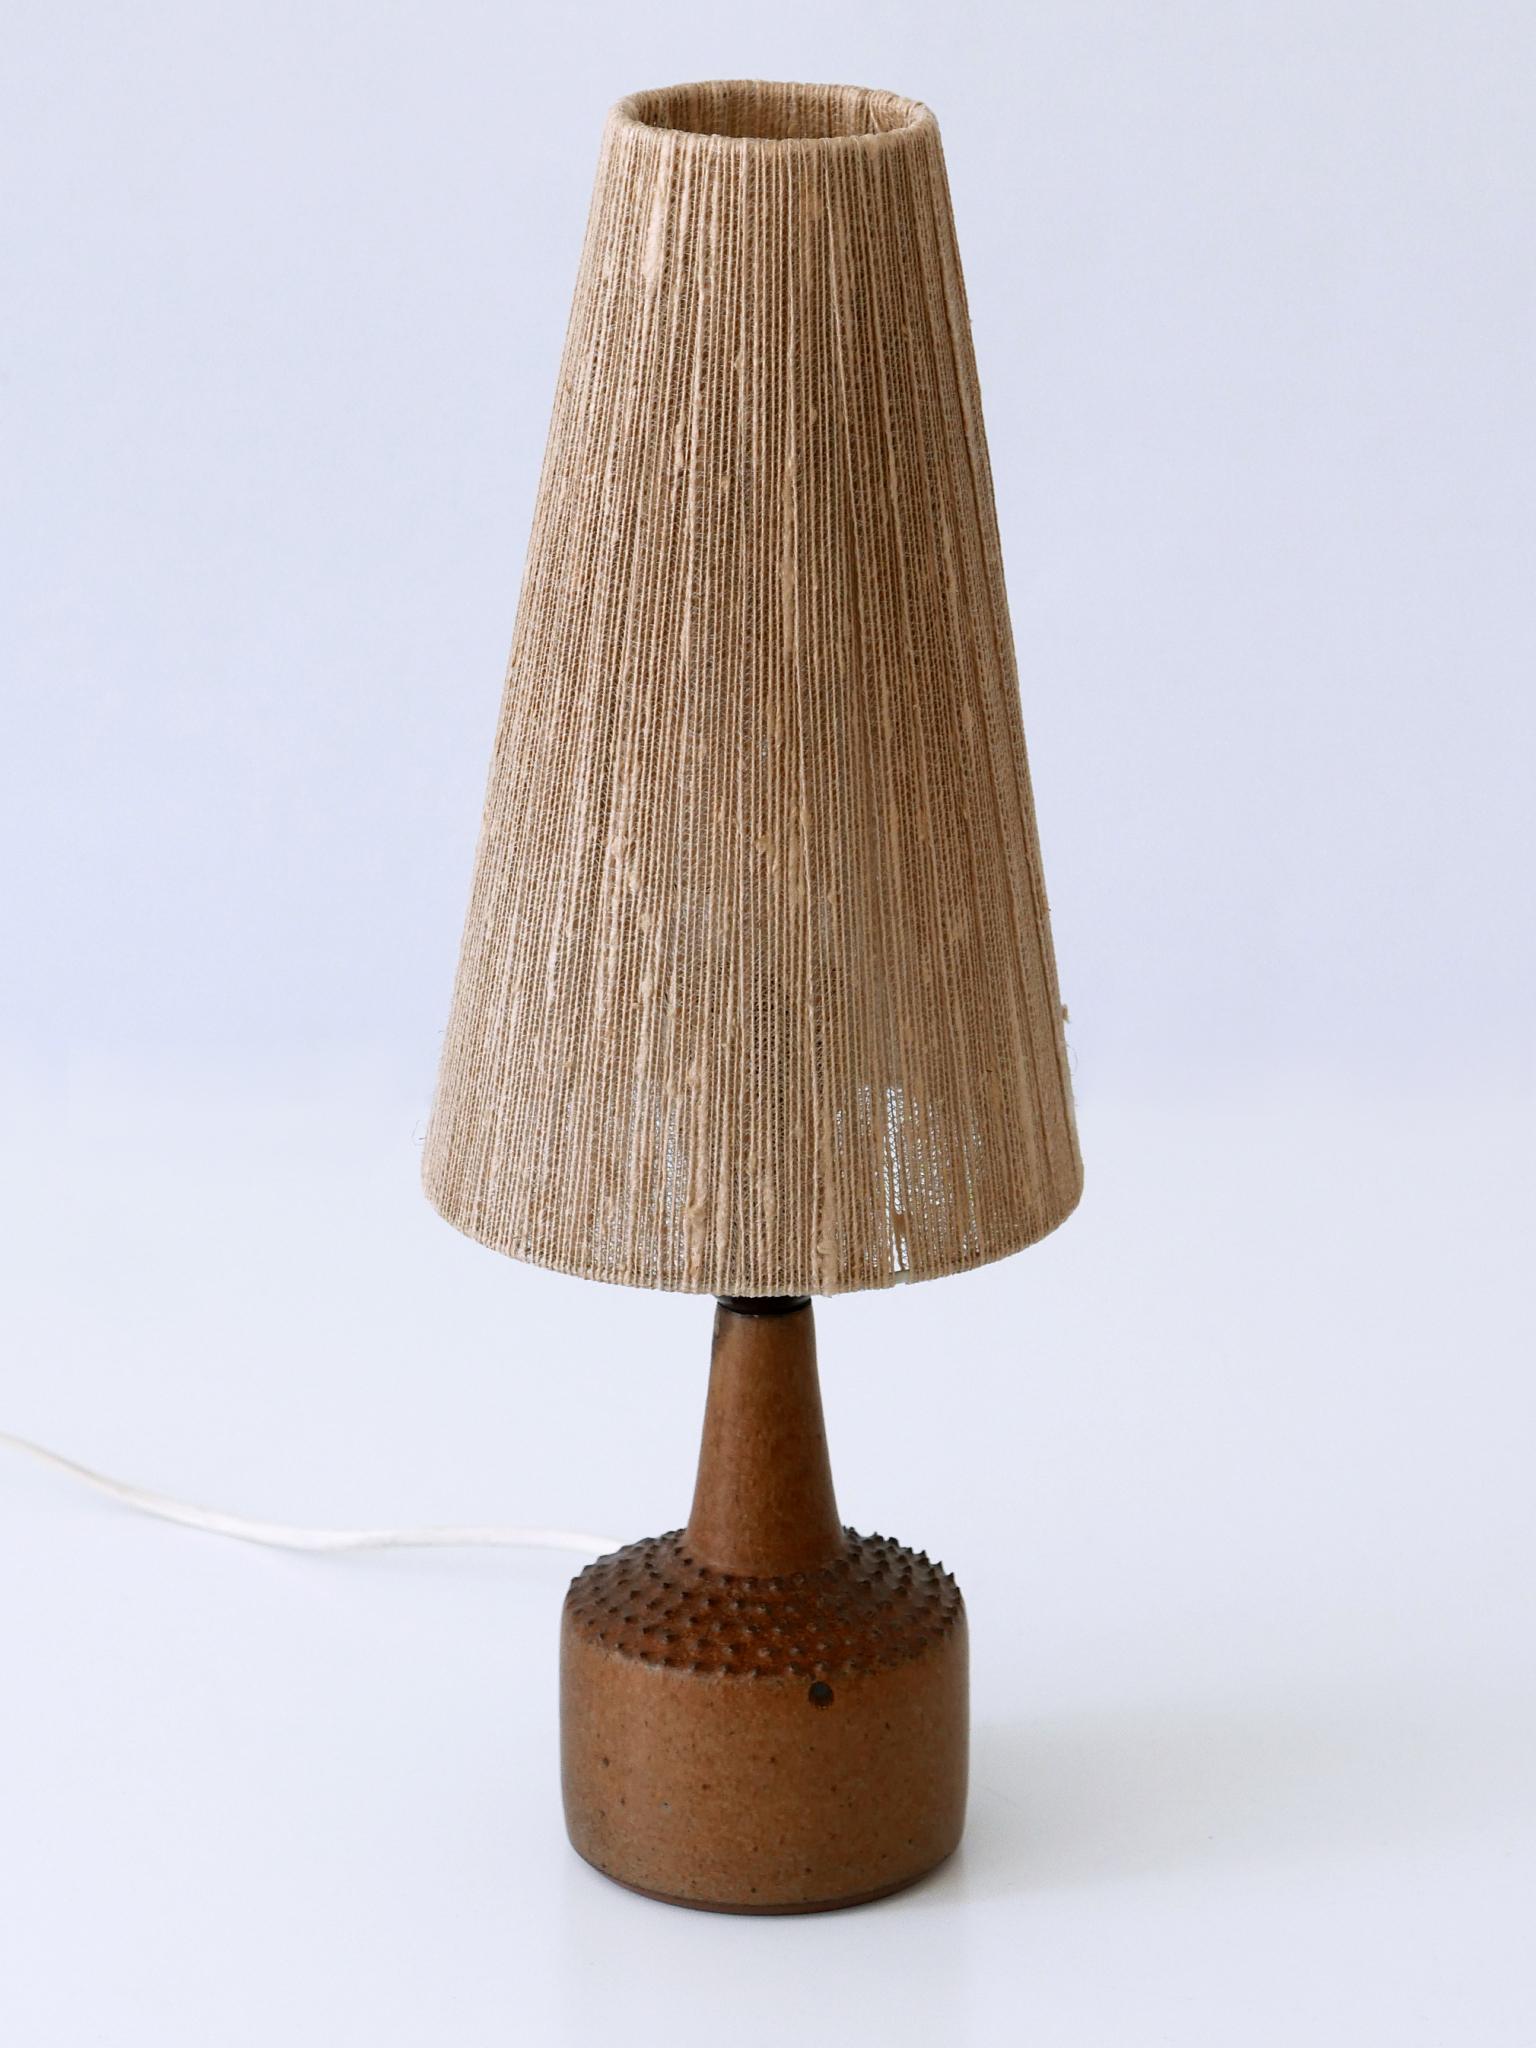 Rare Mid-Century Glazed Stoneware Table Lamp by Rolf Palm for Mölle Sweden 1962 1